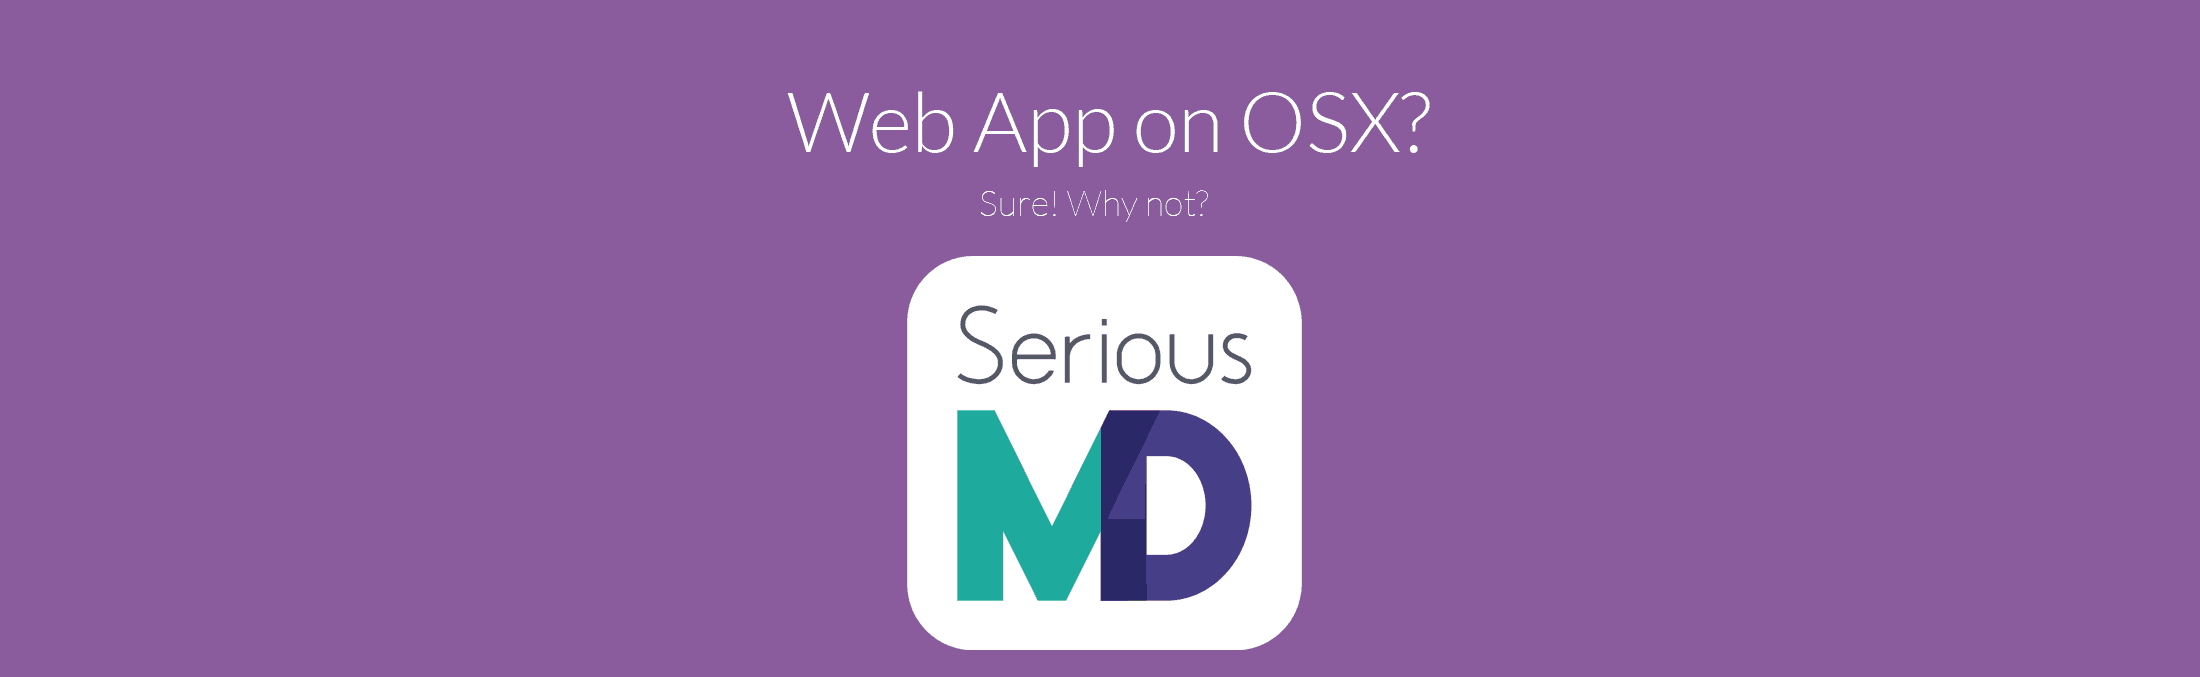 SeriousMD Doctors OSX